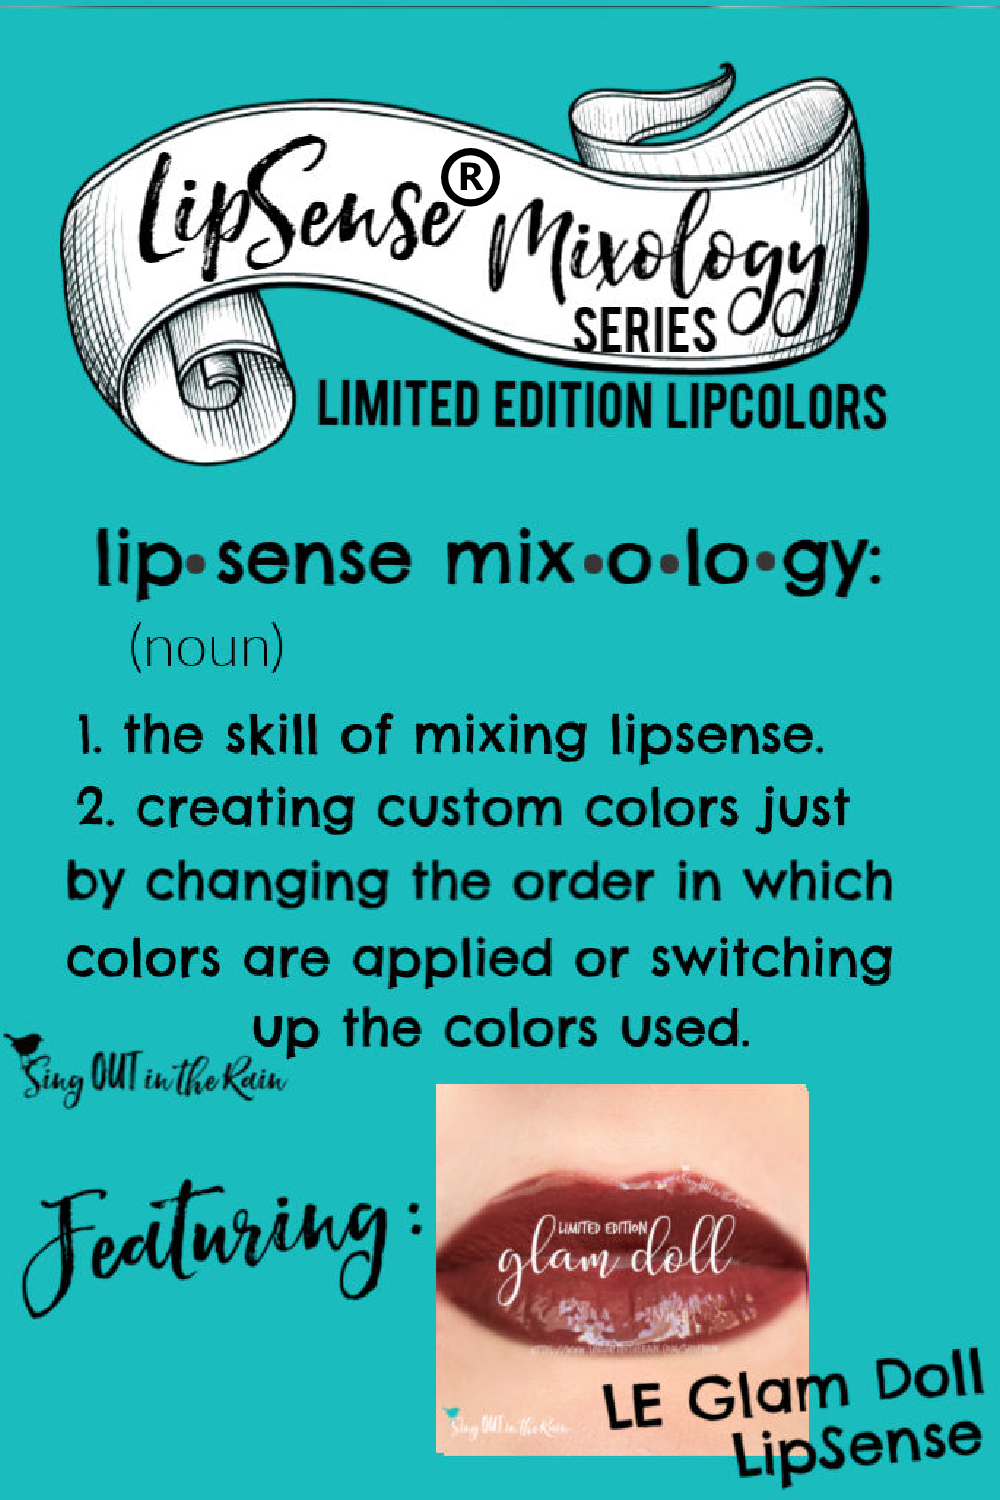 The Ultimate Guide to Glam Doll LipSense Mixology